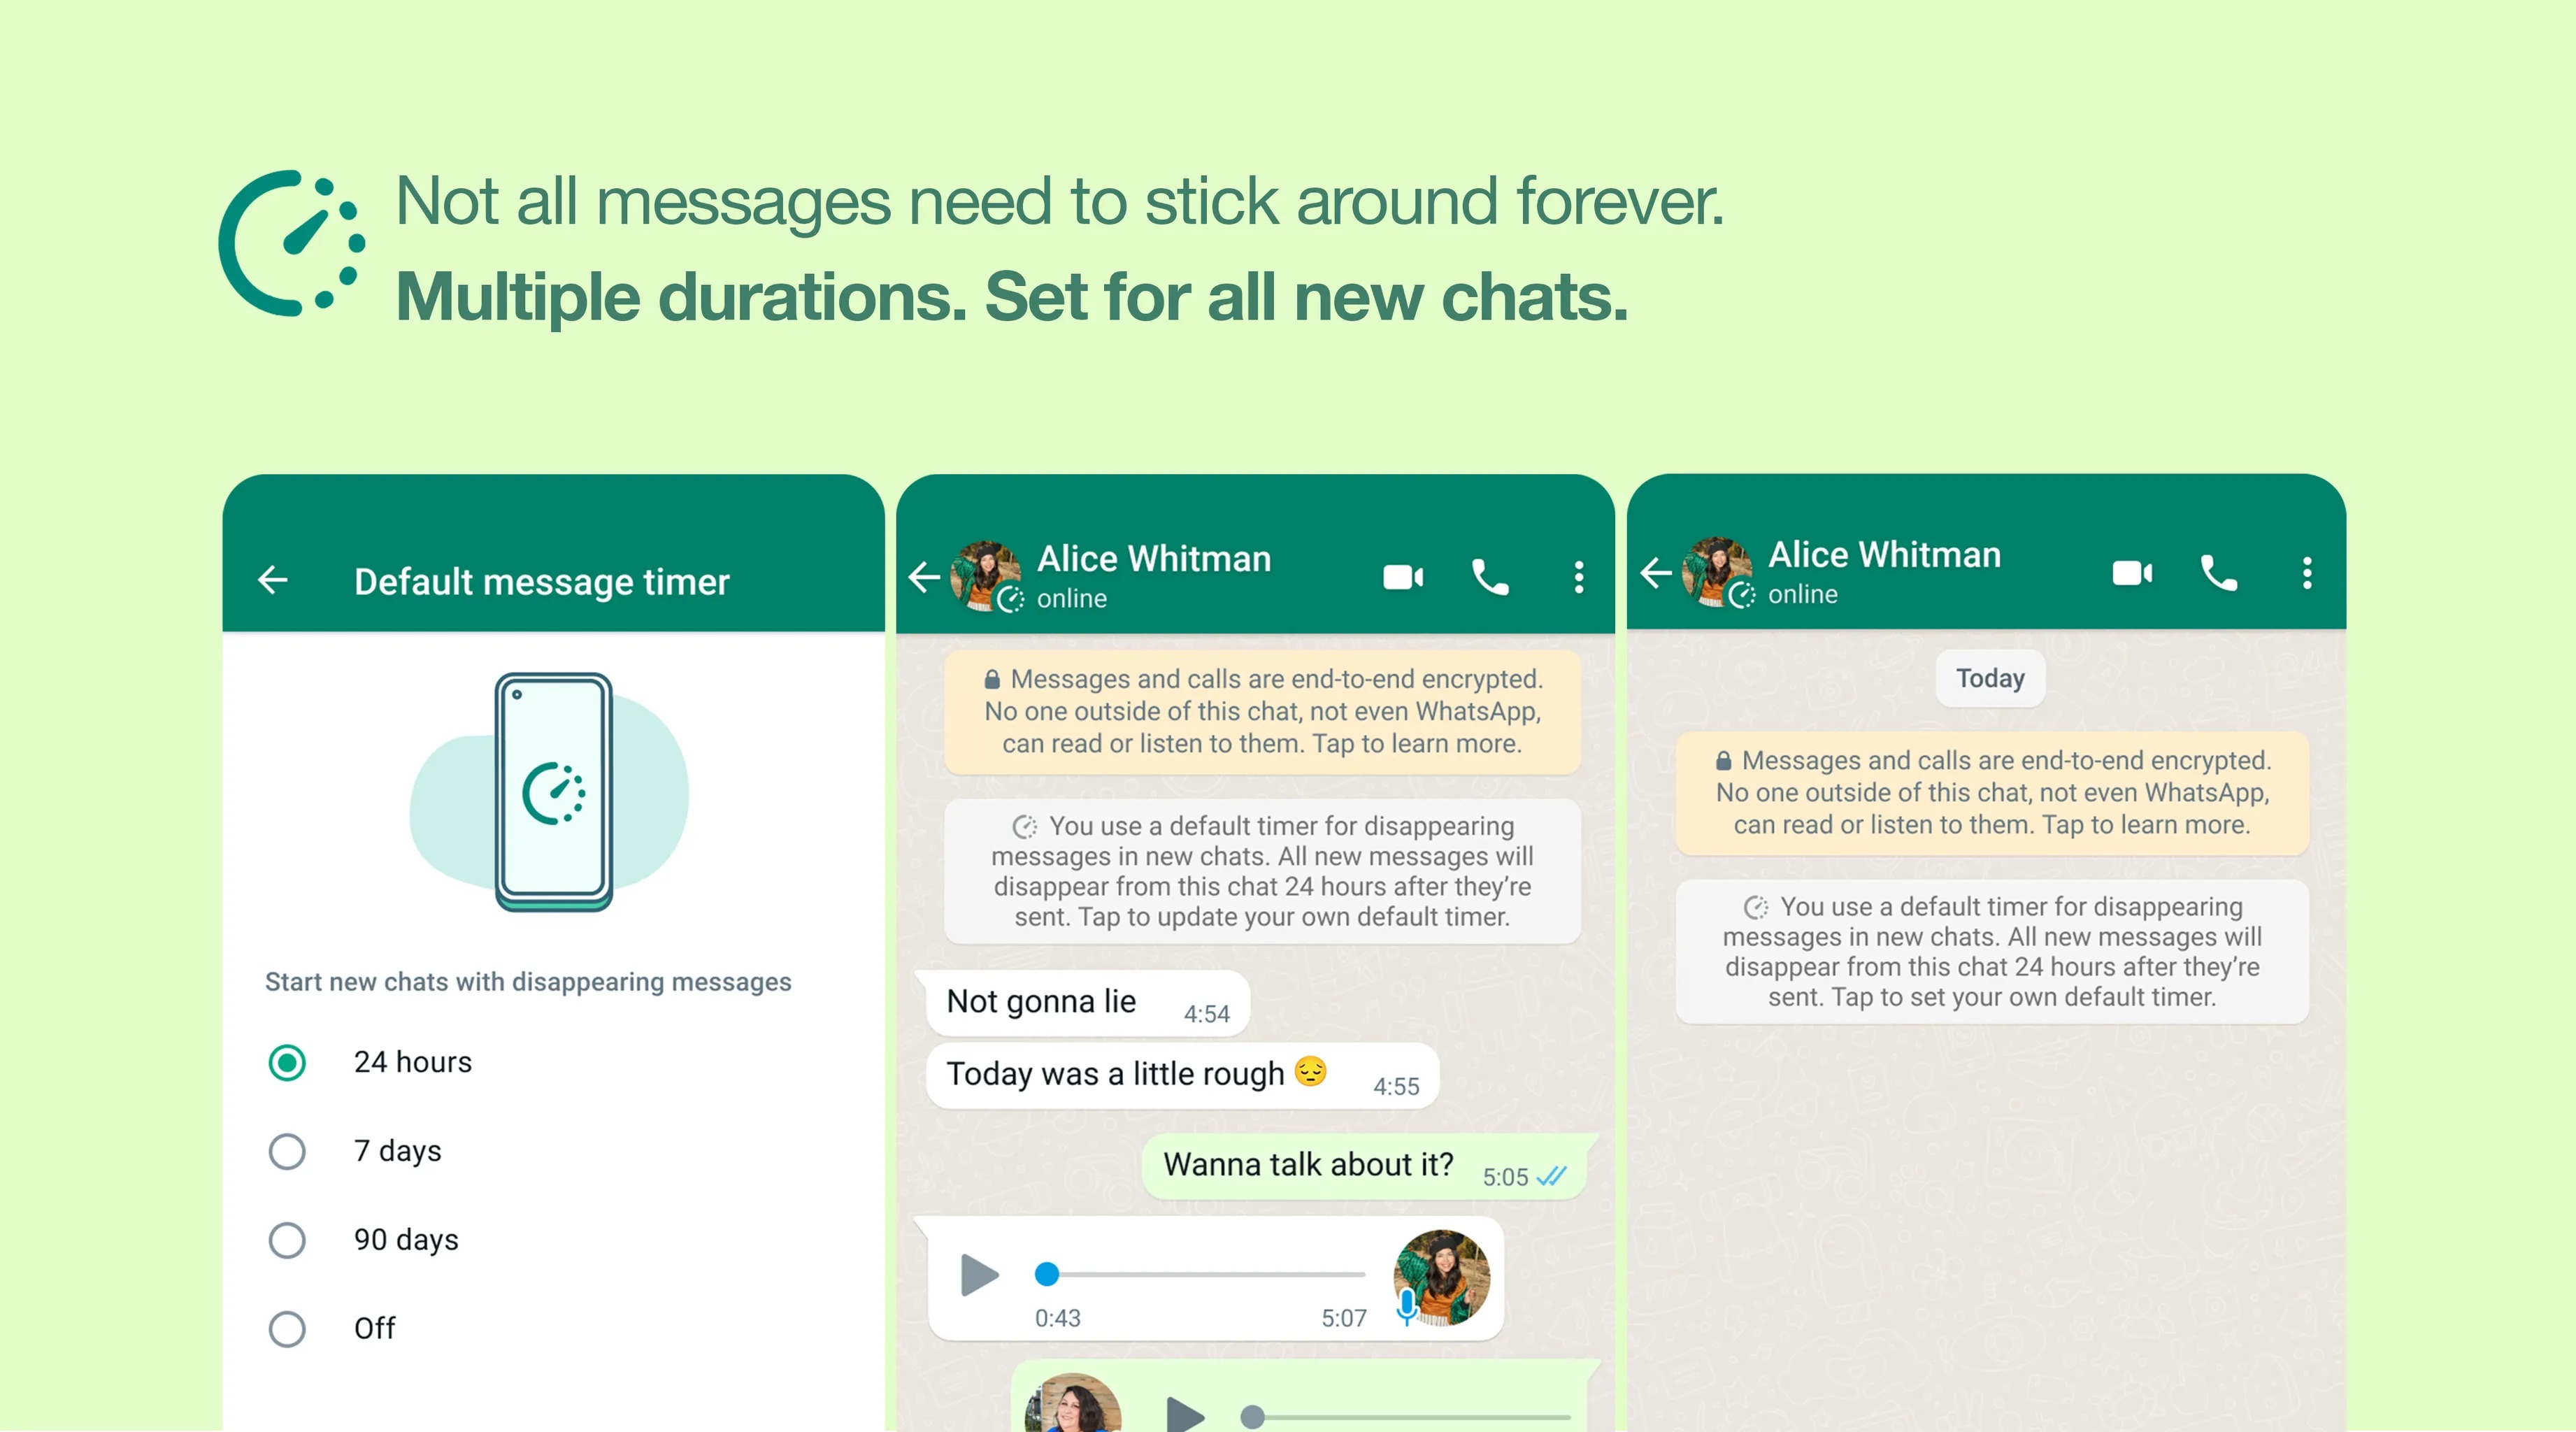 Marketing image showing the main features of WhatsApp's disappearing messages with multiple durations